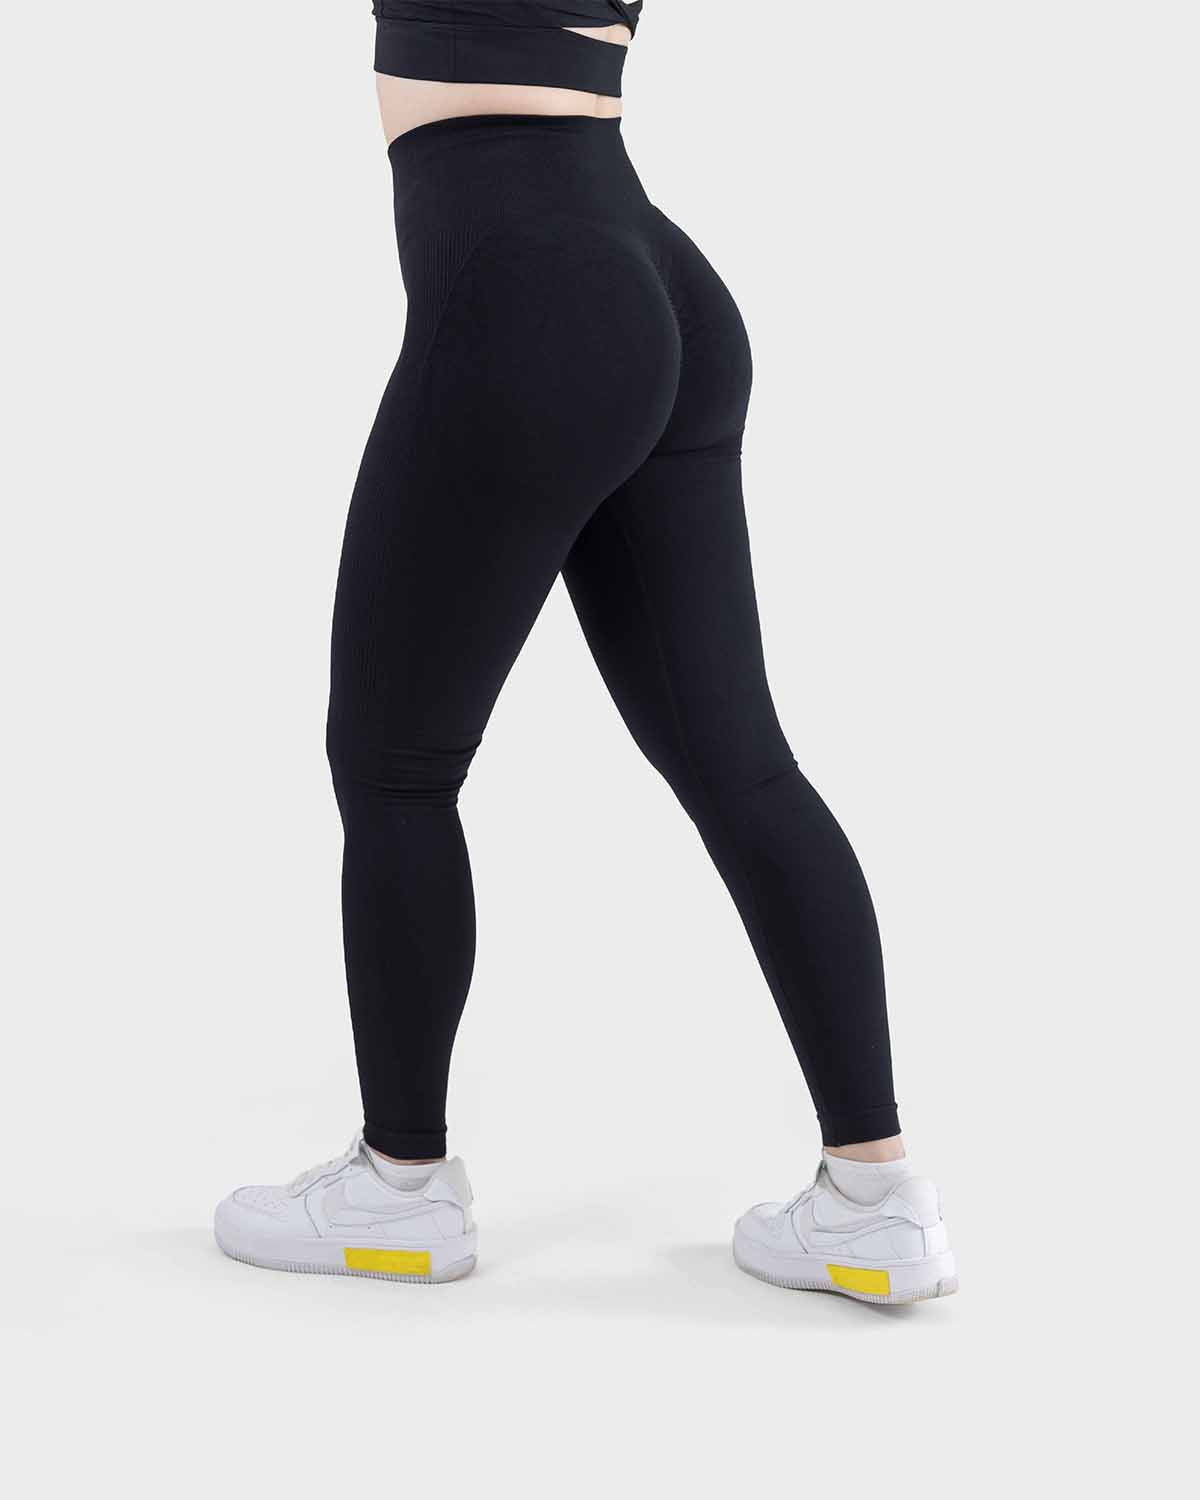 Gymshark leggings that make your bum looker bigger are now 20% off